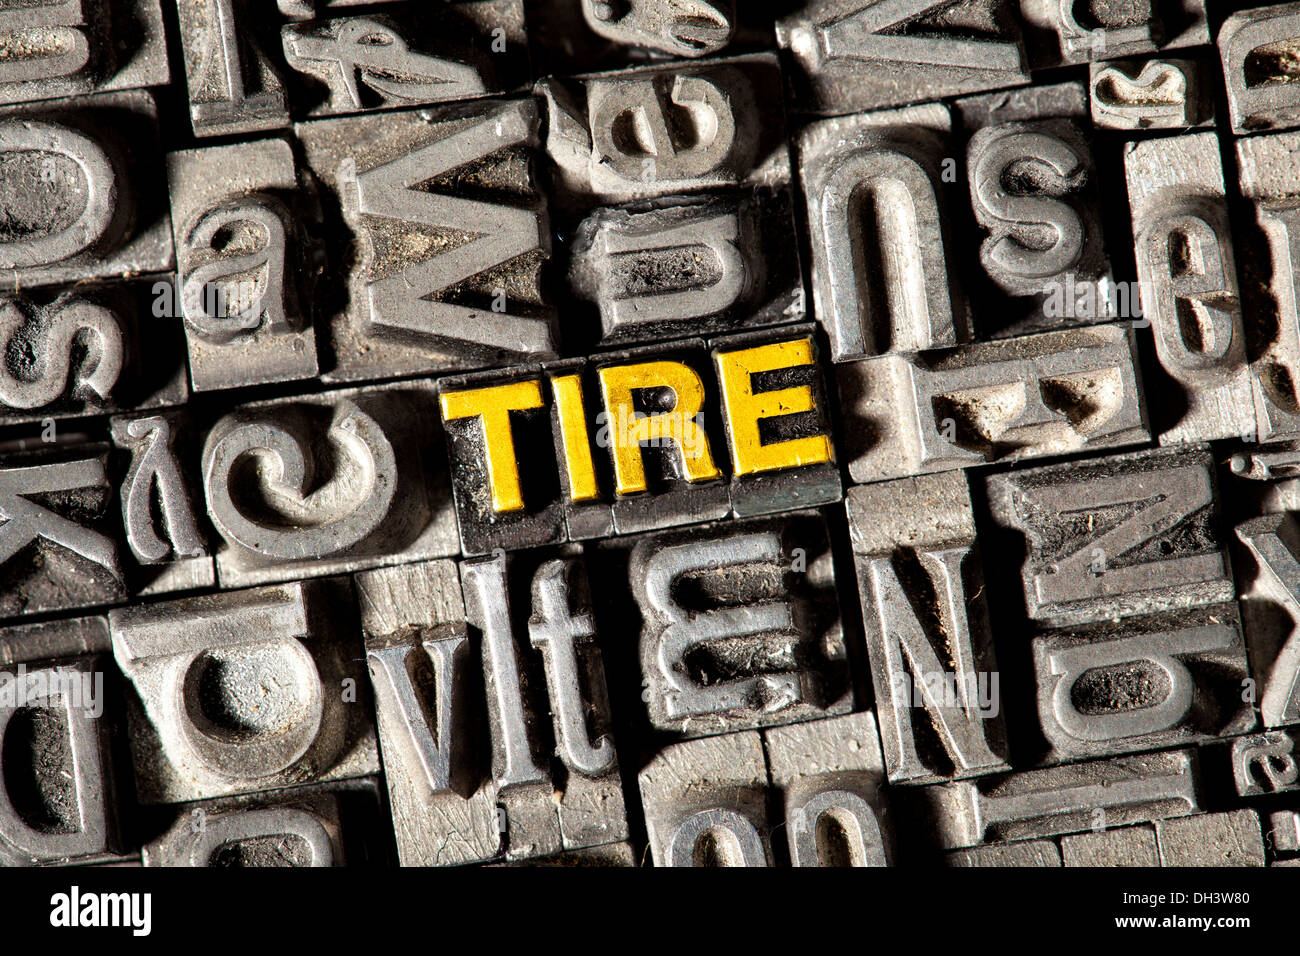 Old lead letters forming the word Tire Stock Photo